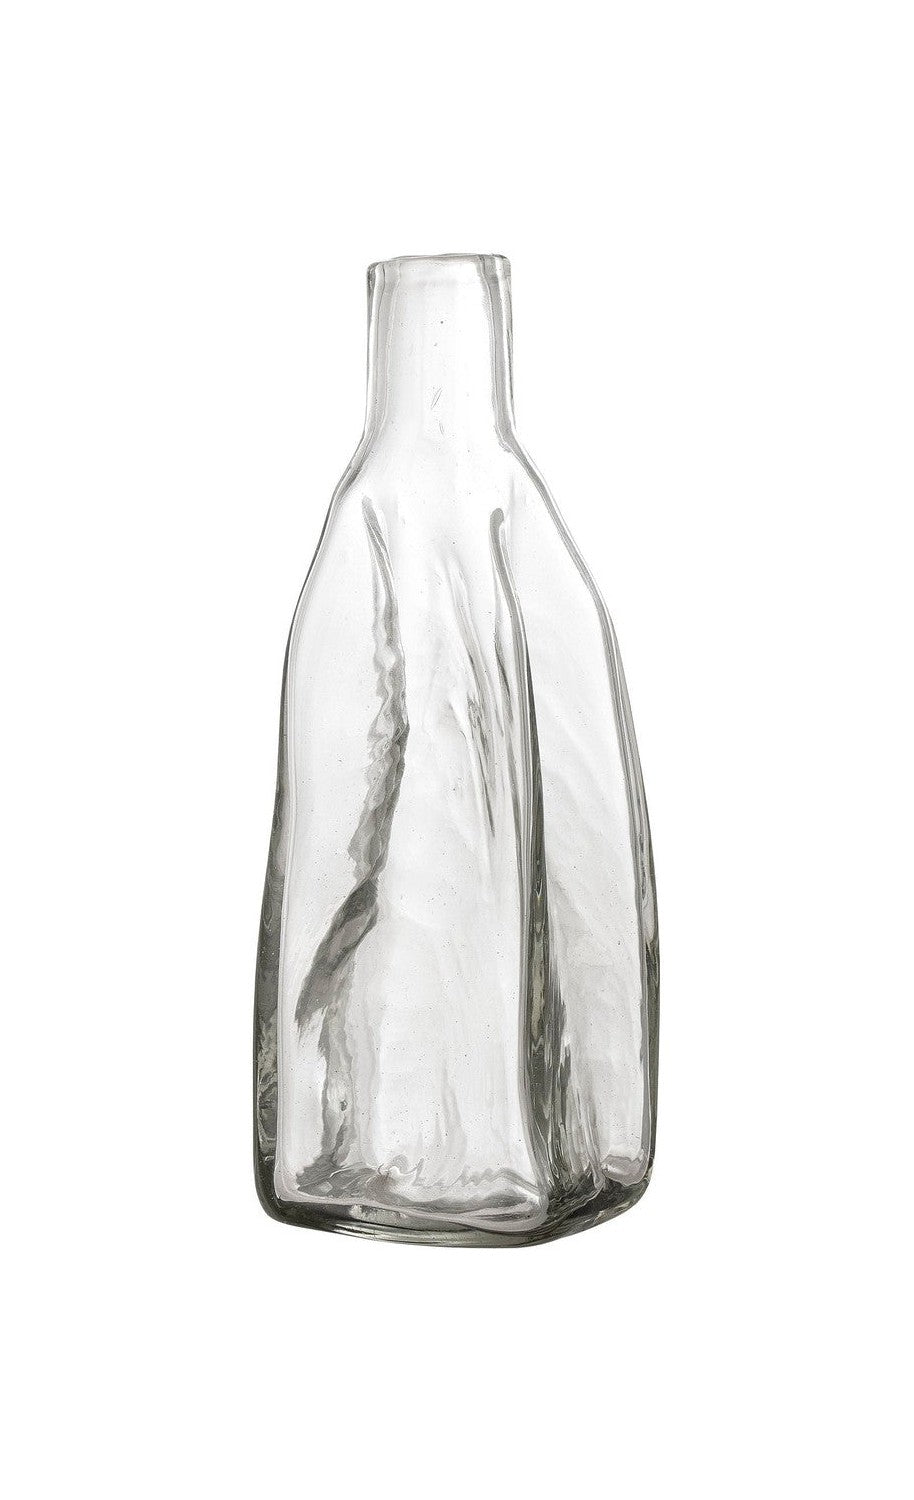 Creative Collection Lenka Decanter, Clear, Recycled Glass